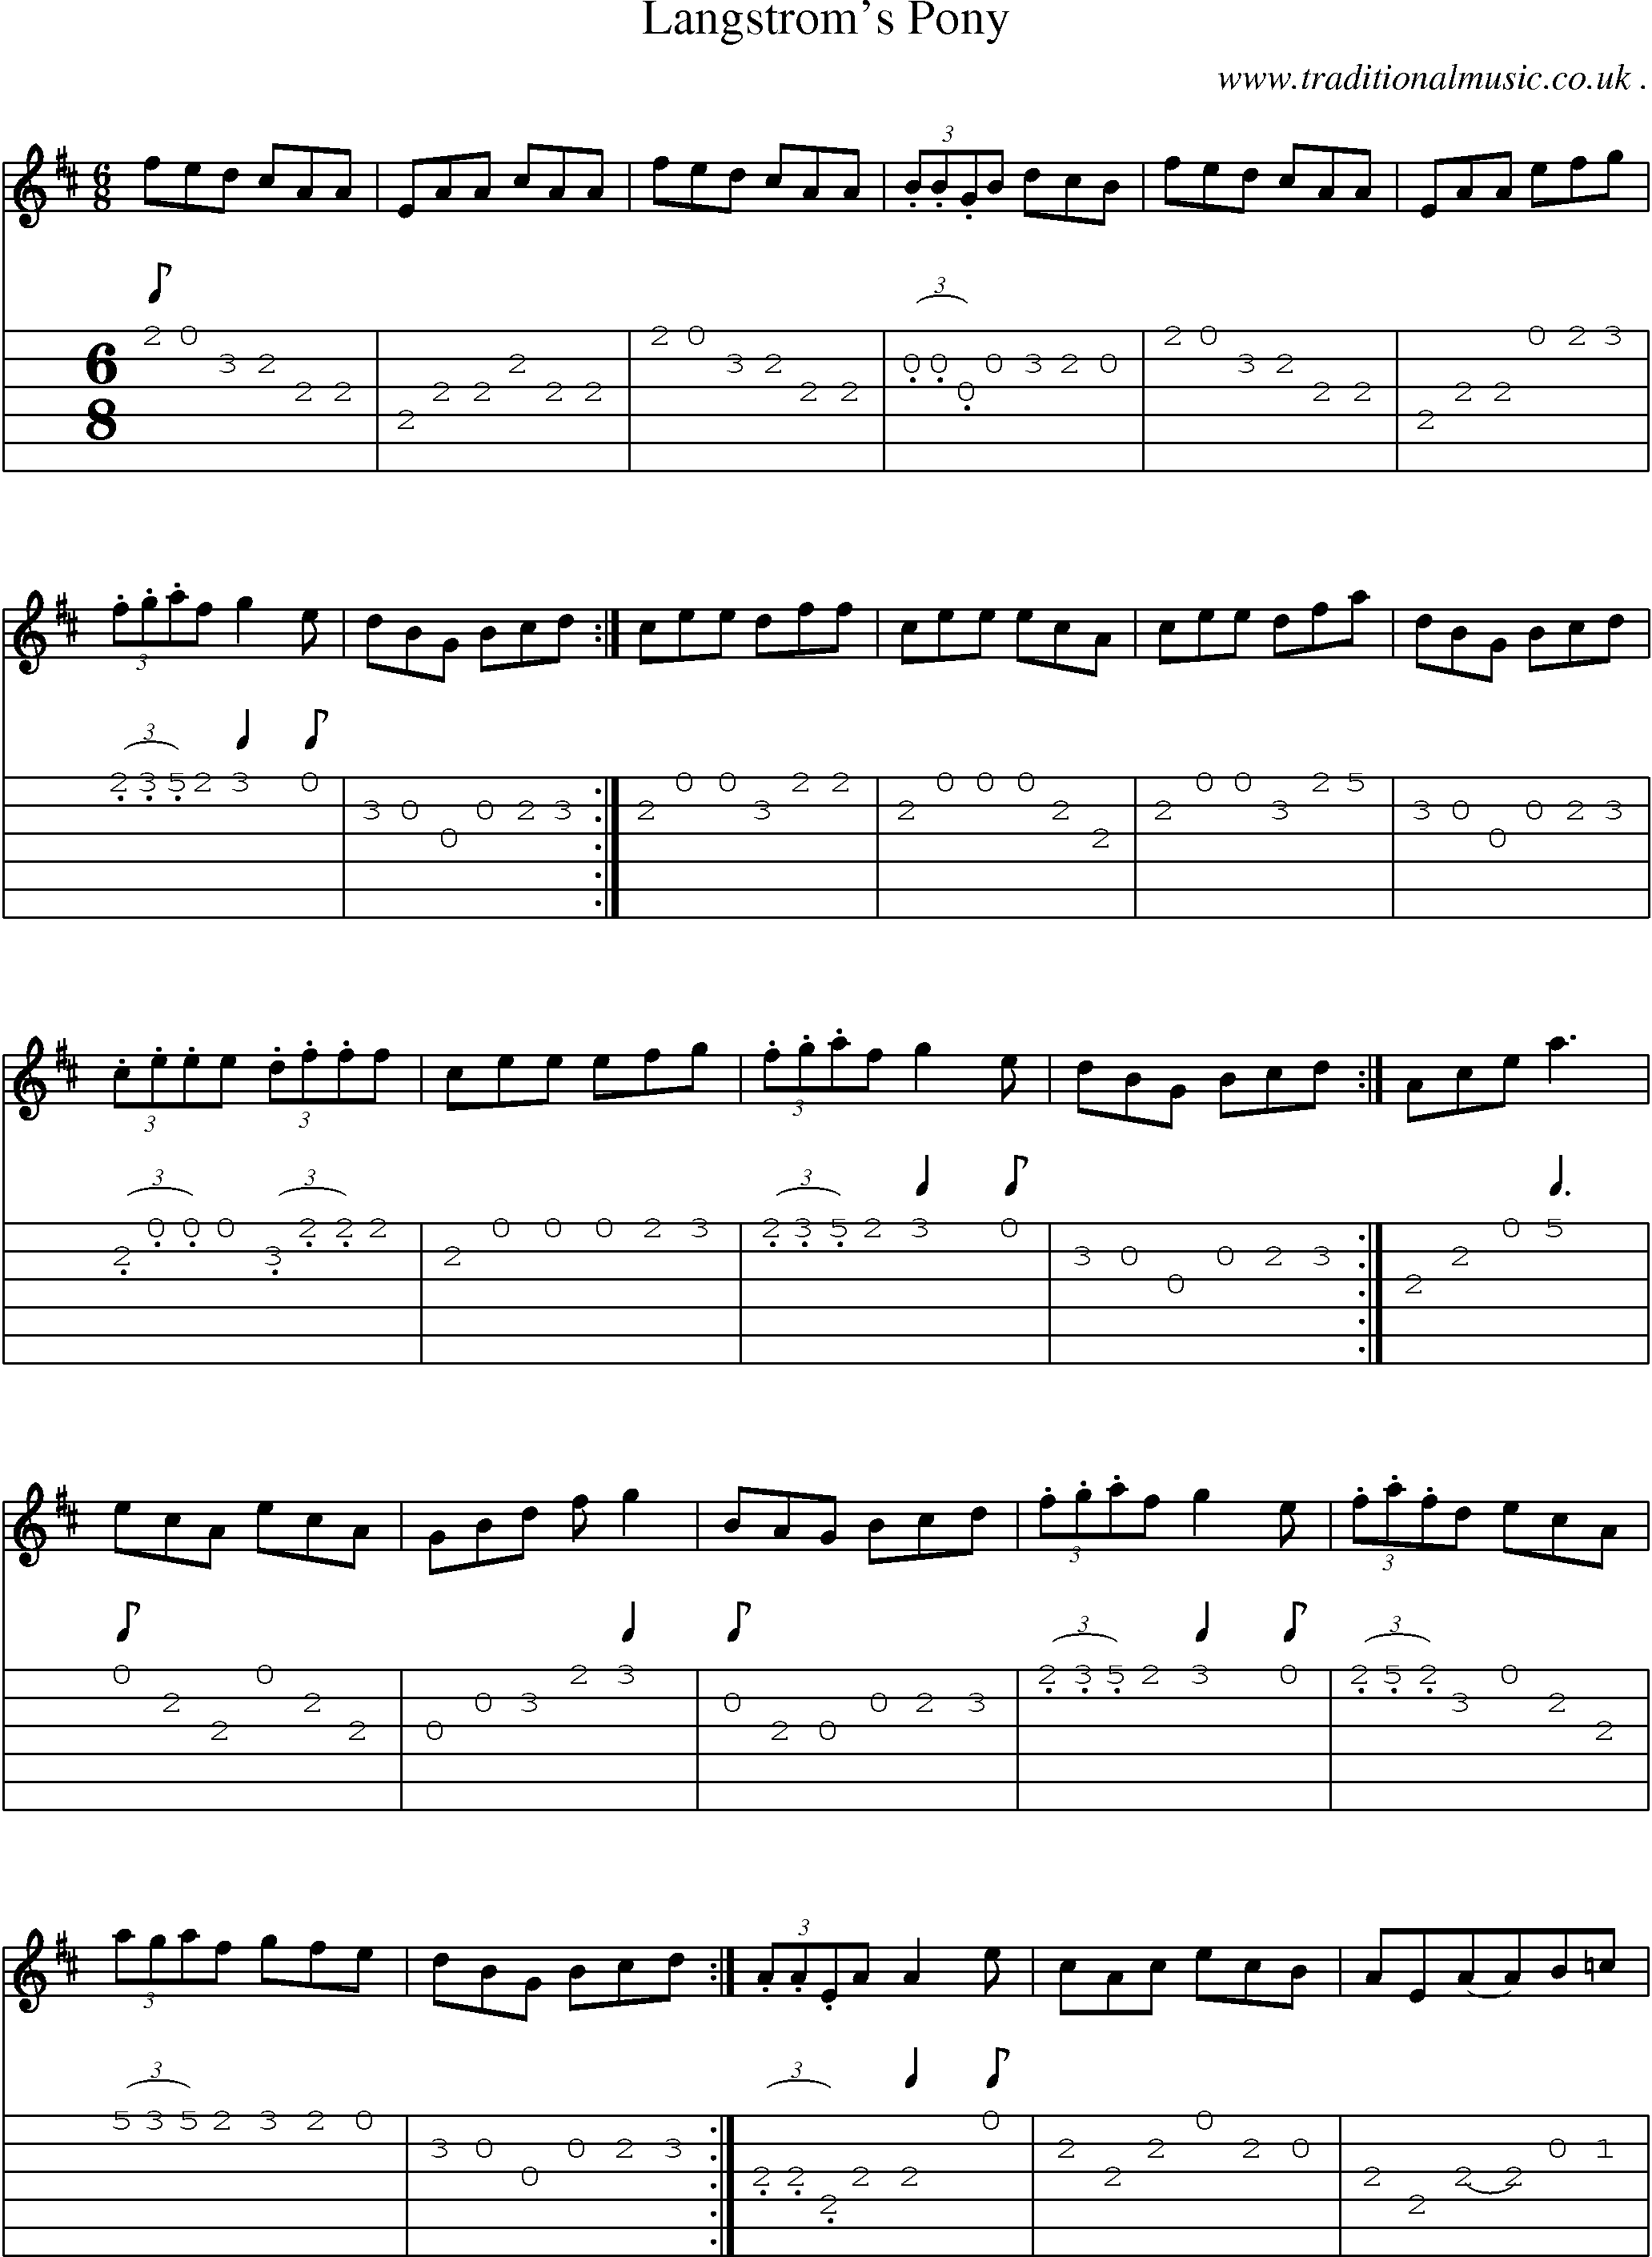 Sheet-Music and Guitar Tabs for Langstroms Pony